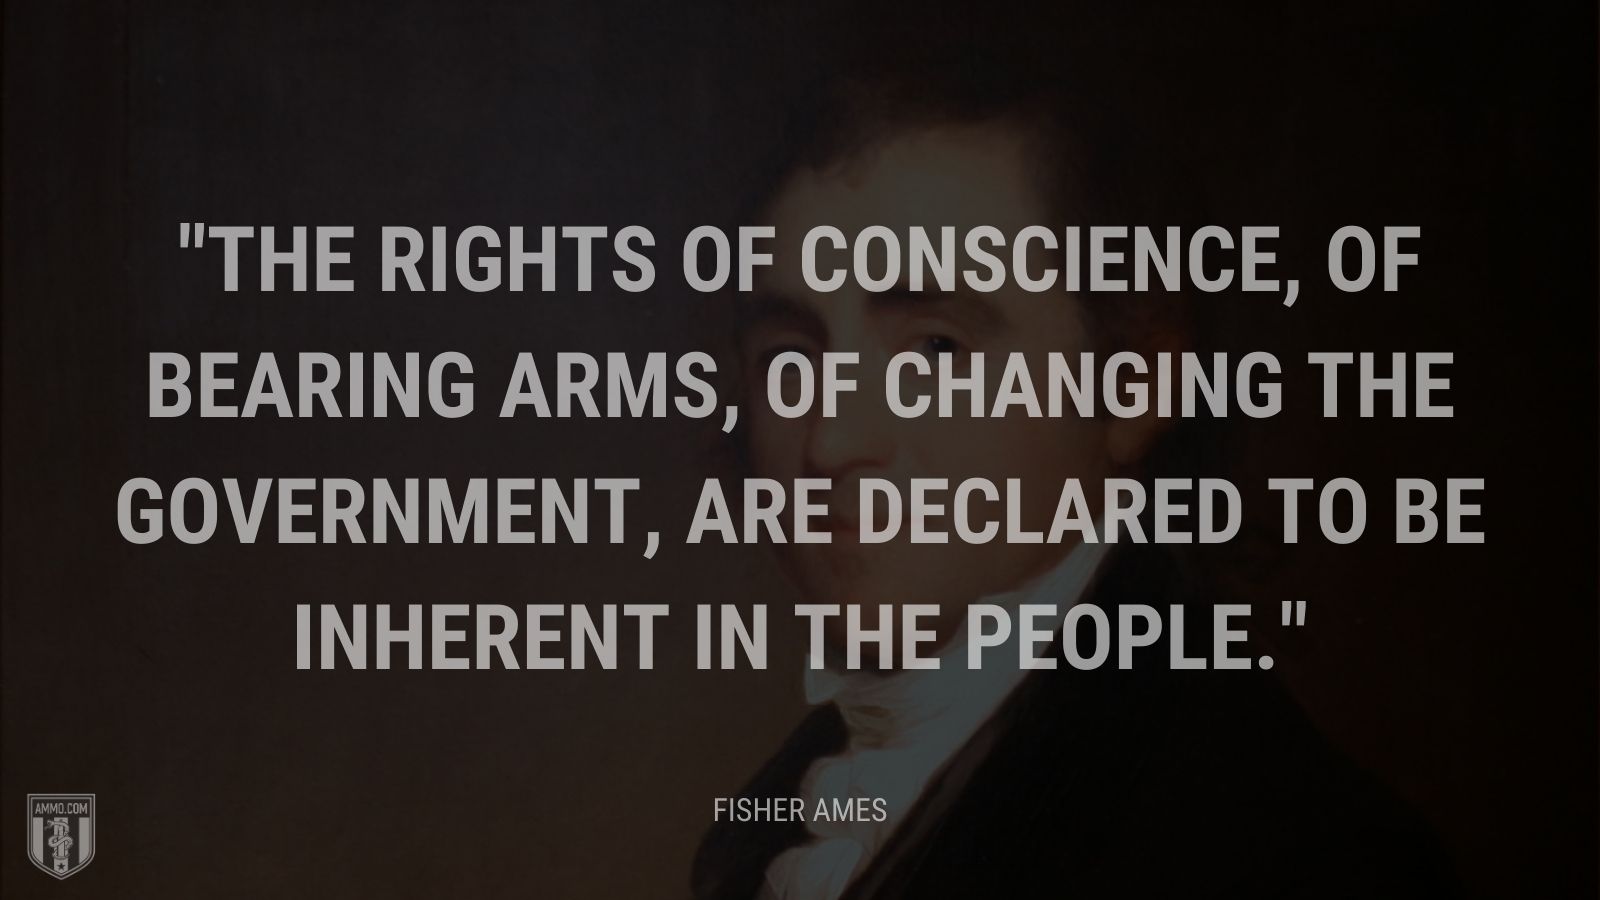 “The rights of conscience, of bearing arms, of changing the government, are declared to be inherent in the people.” - Fisher Ames